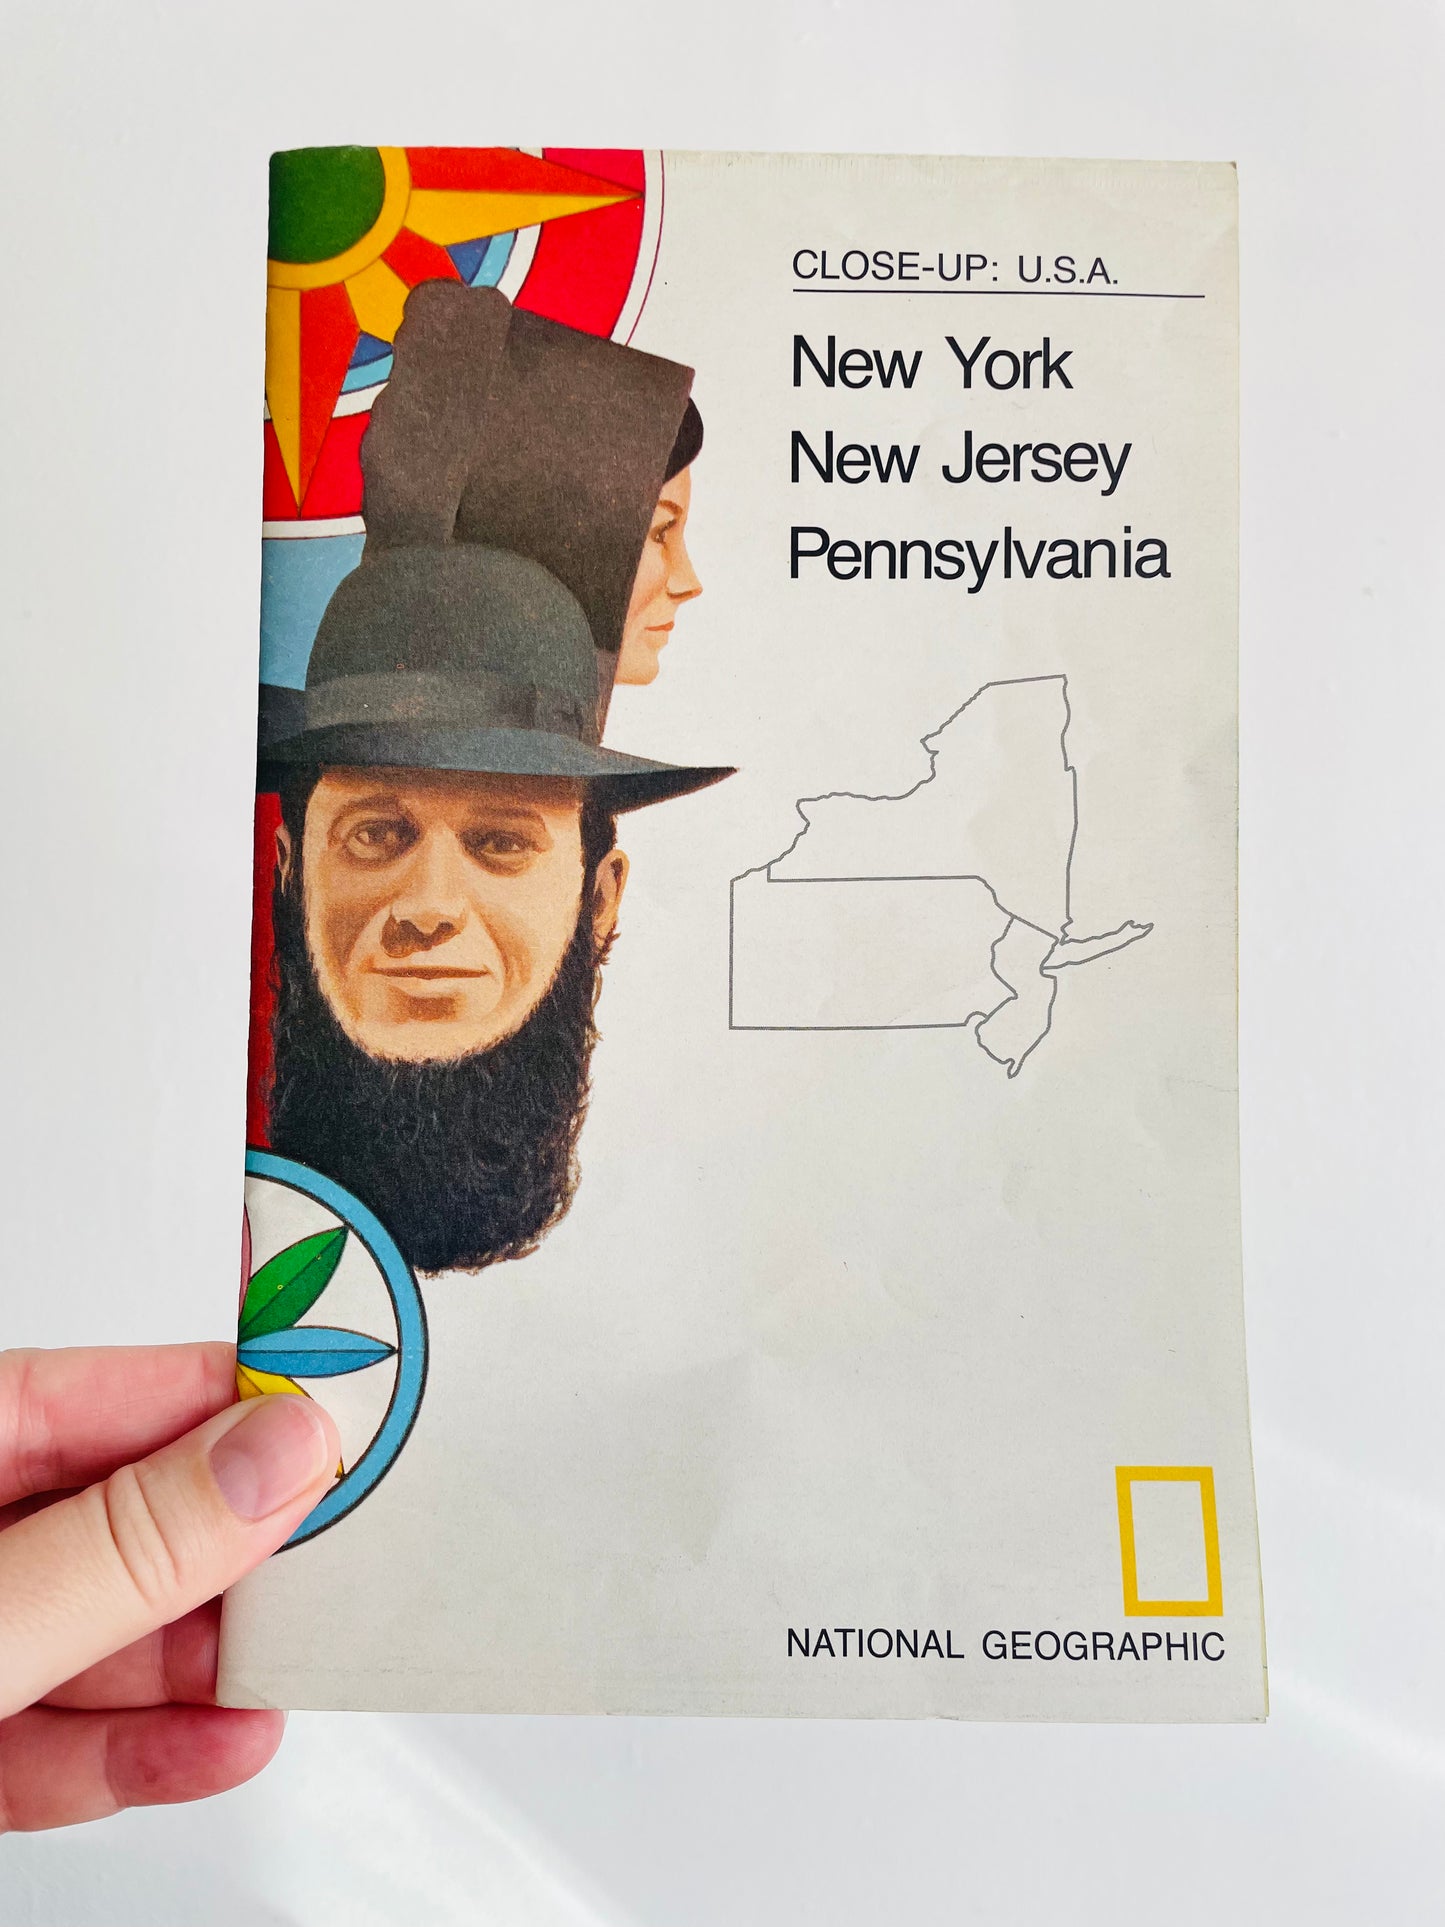 1977 National Geographic Close-Up USA Map - New York, New Jersey, Pennsylvania